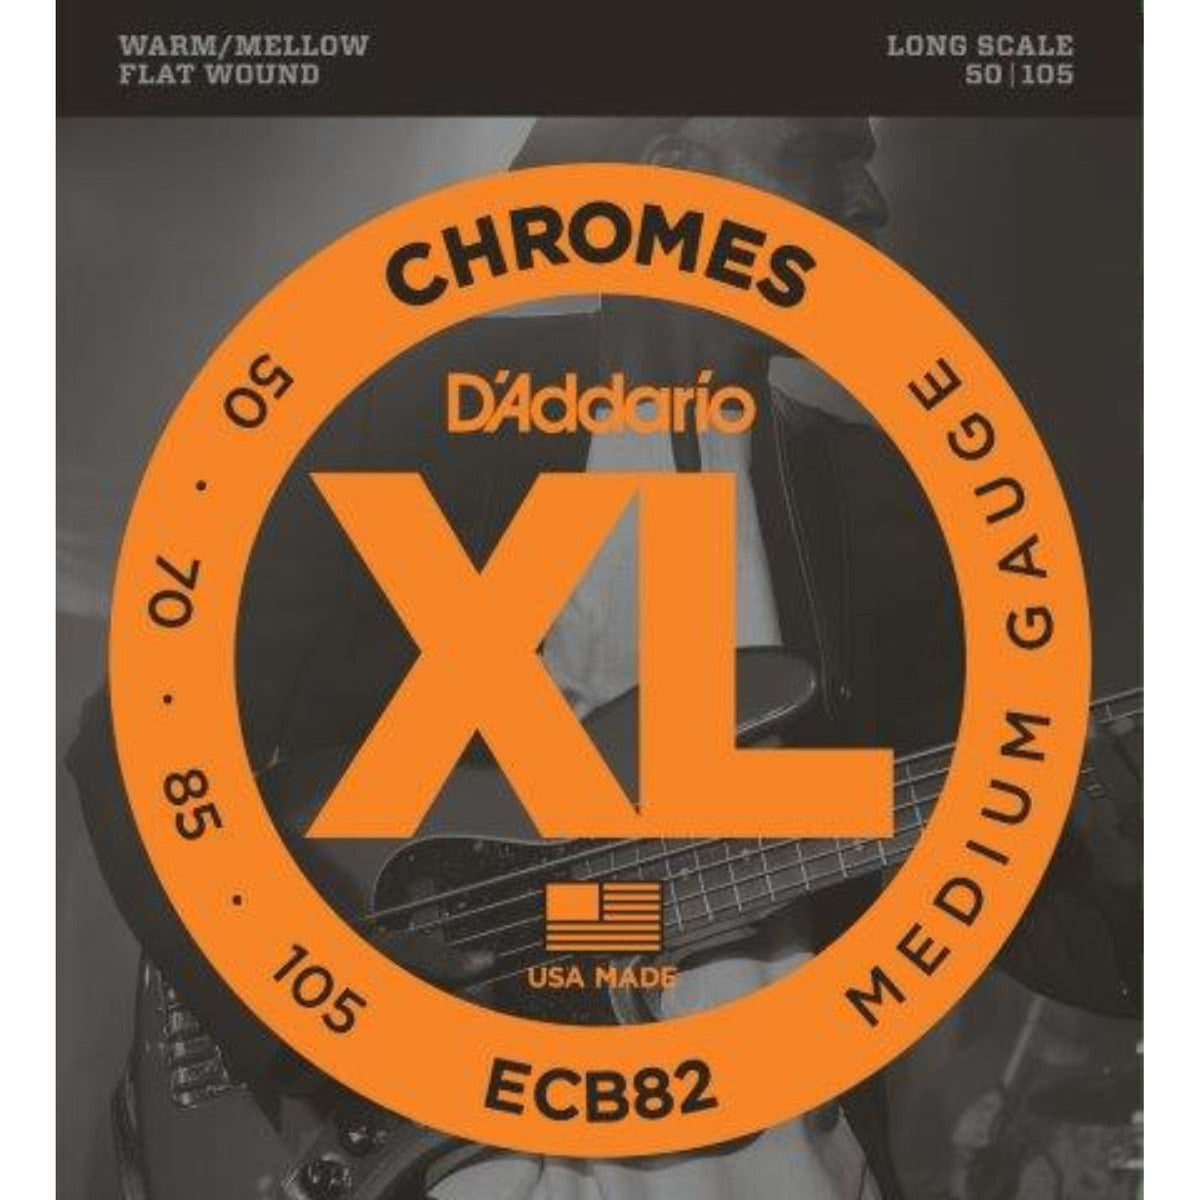 ECB82, D&#39;Addario&#39;s heaviest Flatwound bass strings, are known for their warm, mellow tone and smooth polished feel. 